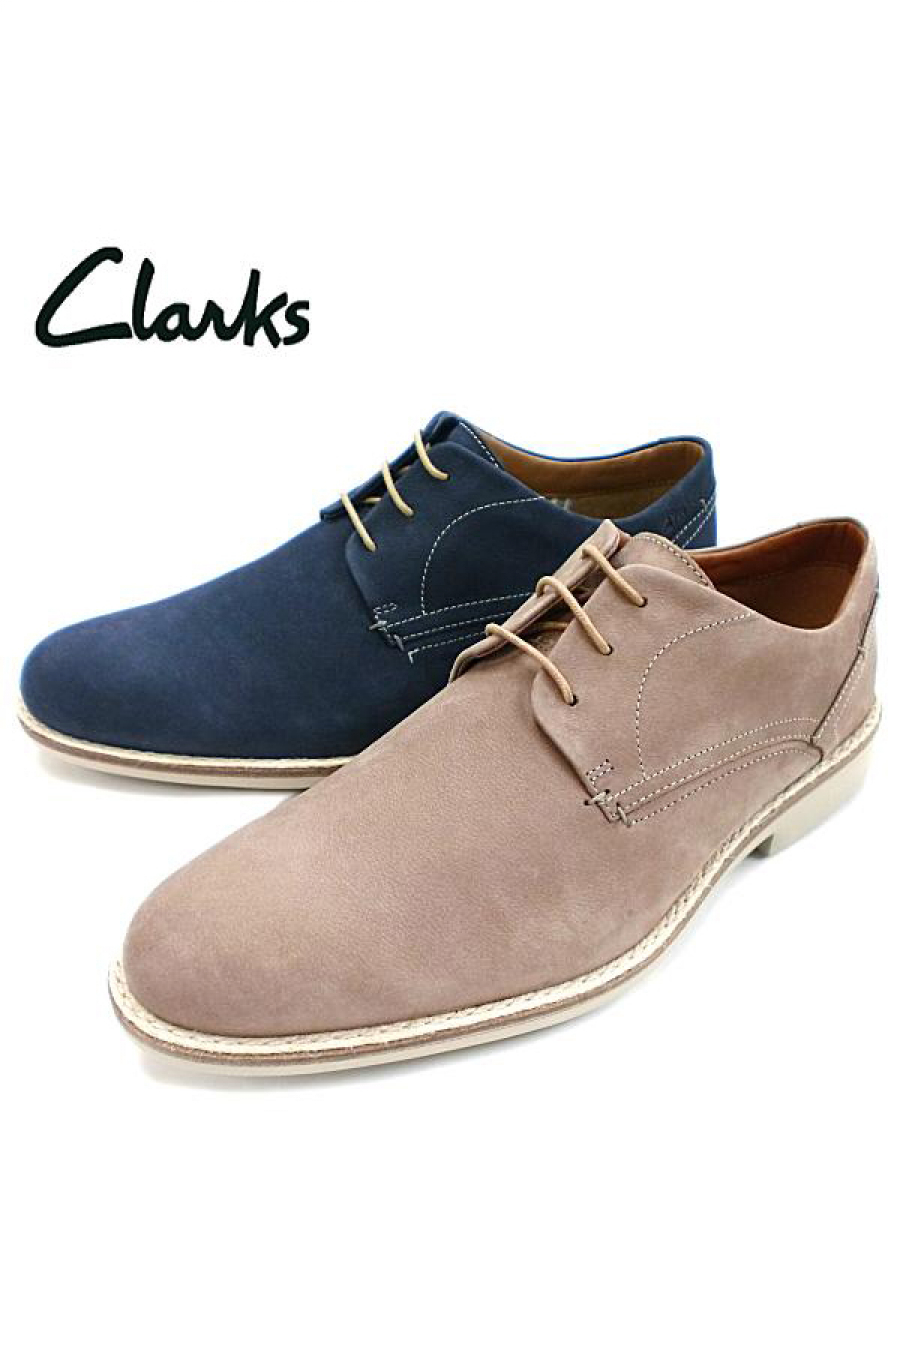 clarks shoes corporate